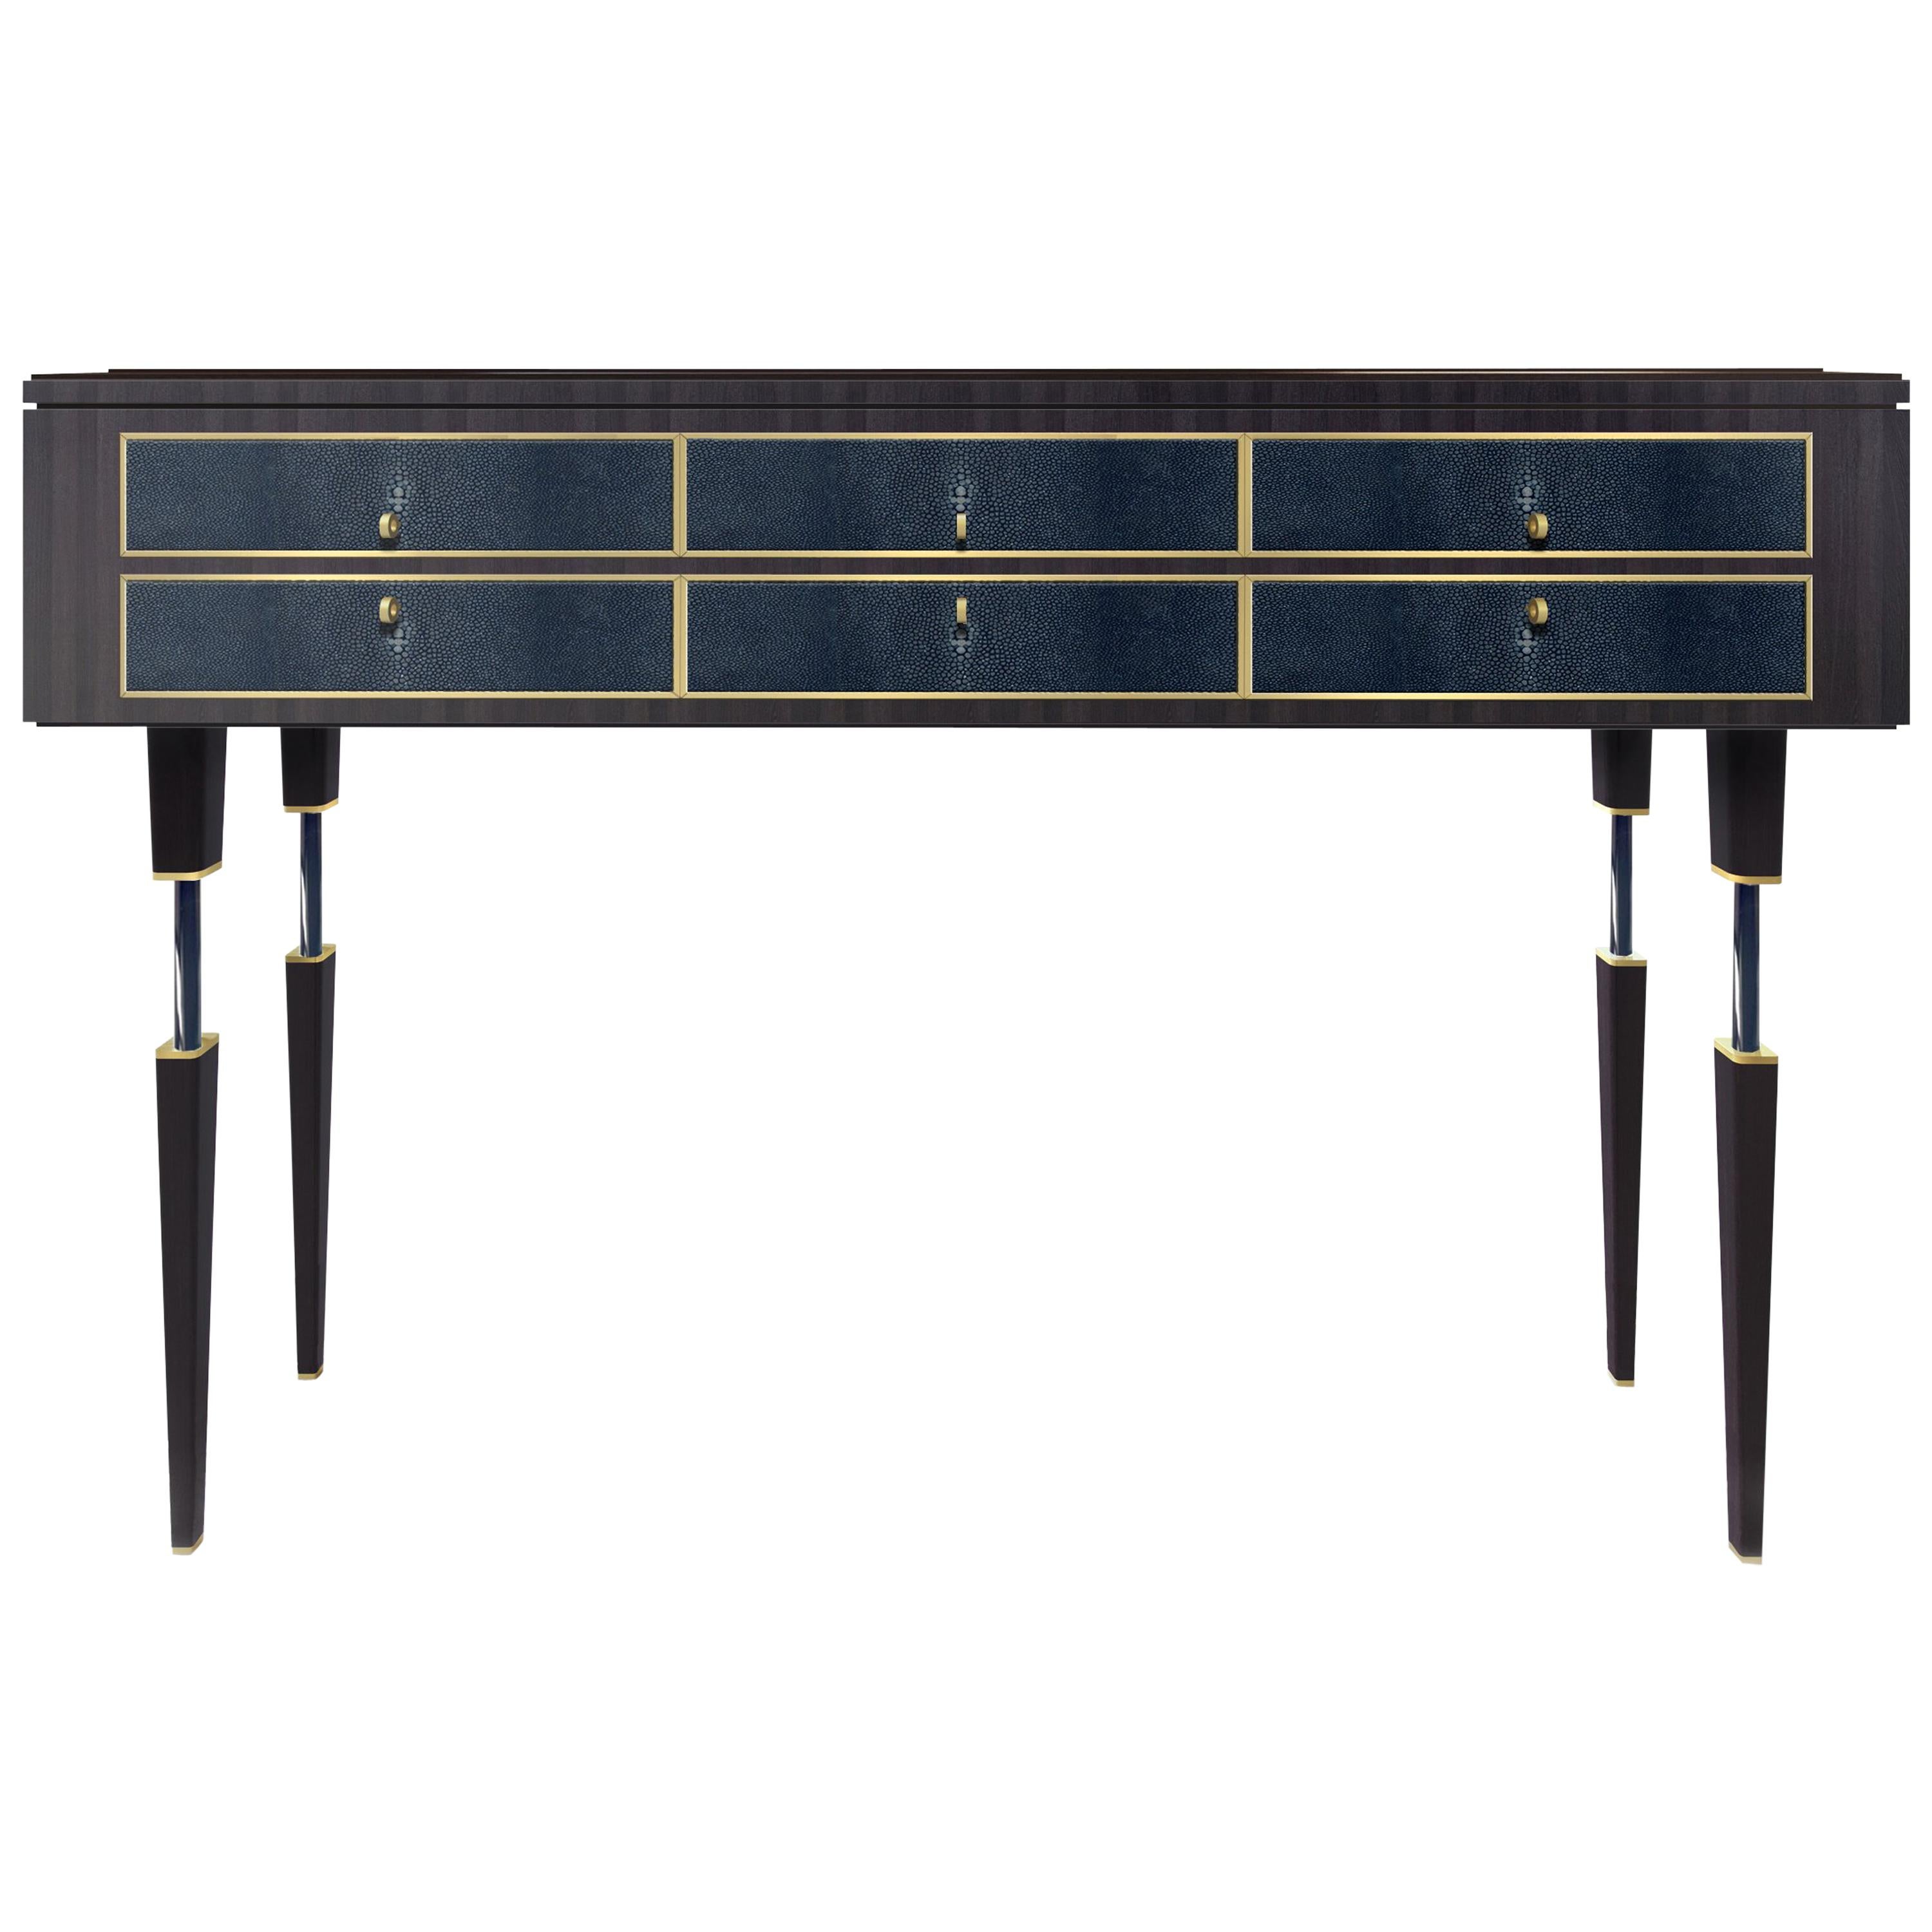 Elegant Shagreen leather and walnut wood Console Table For Sale